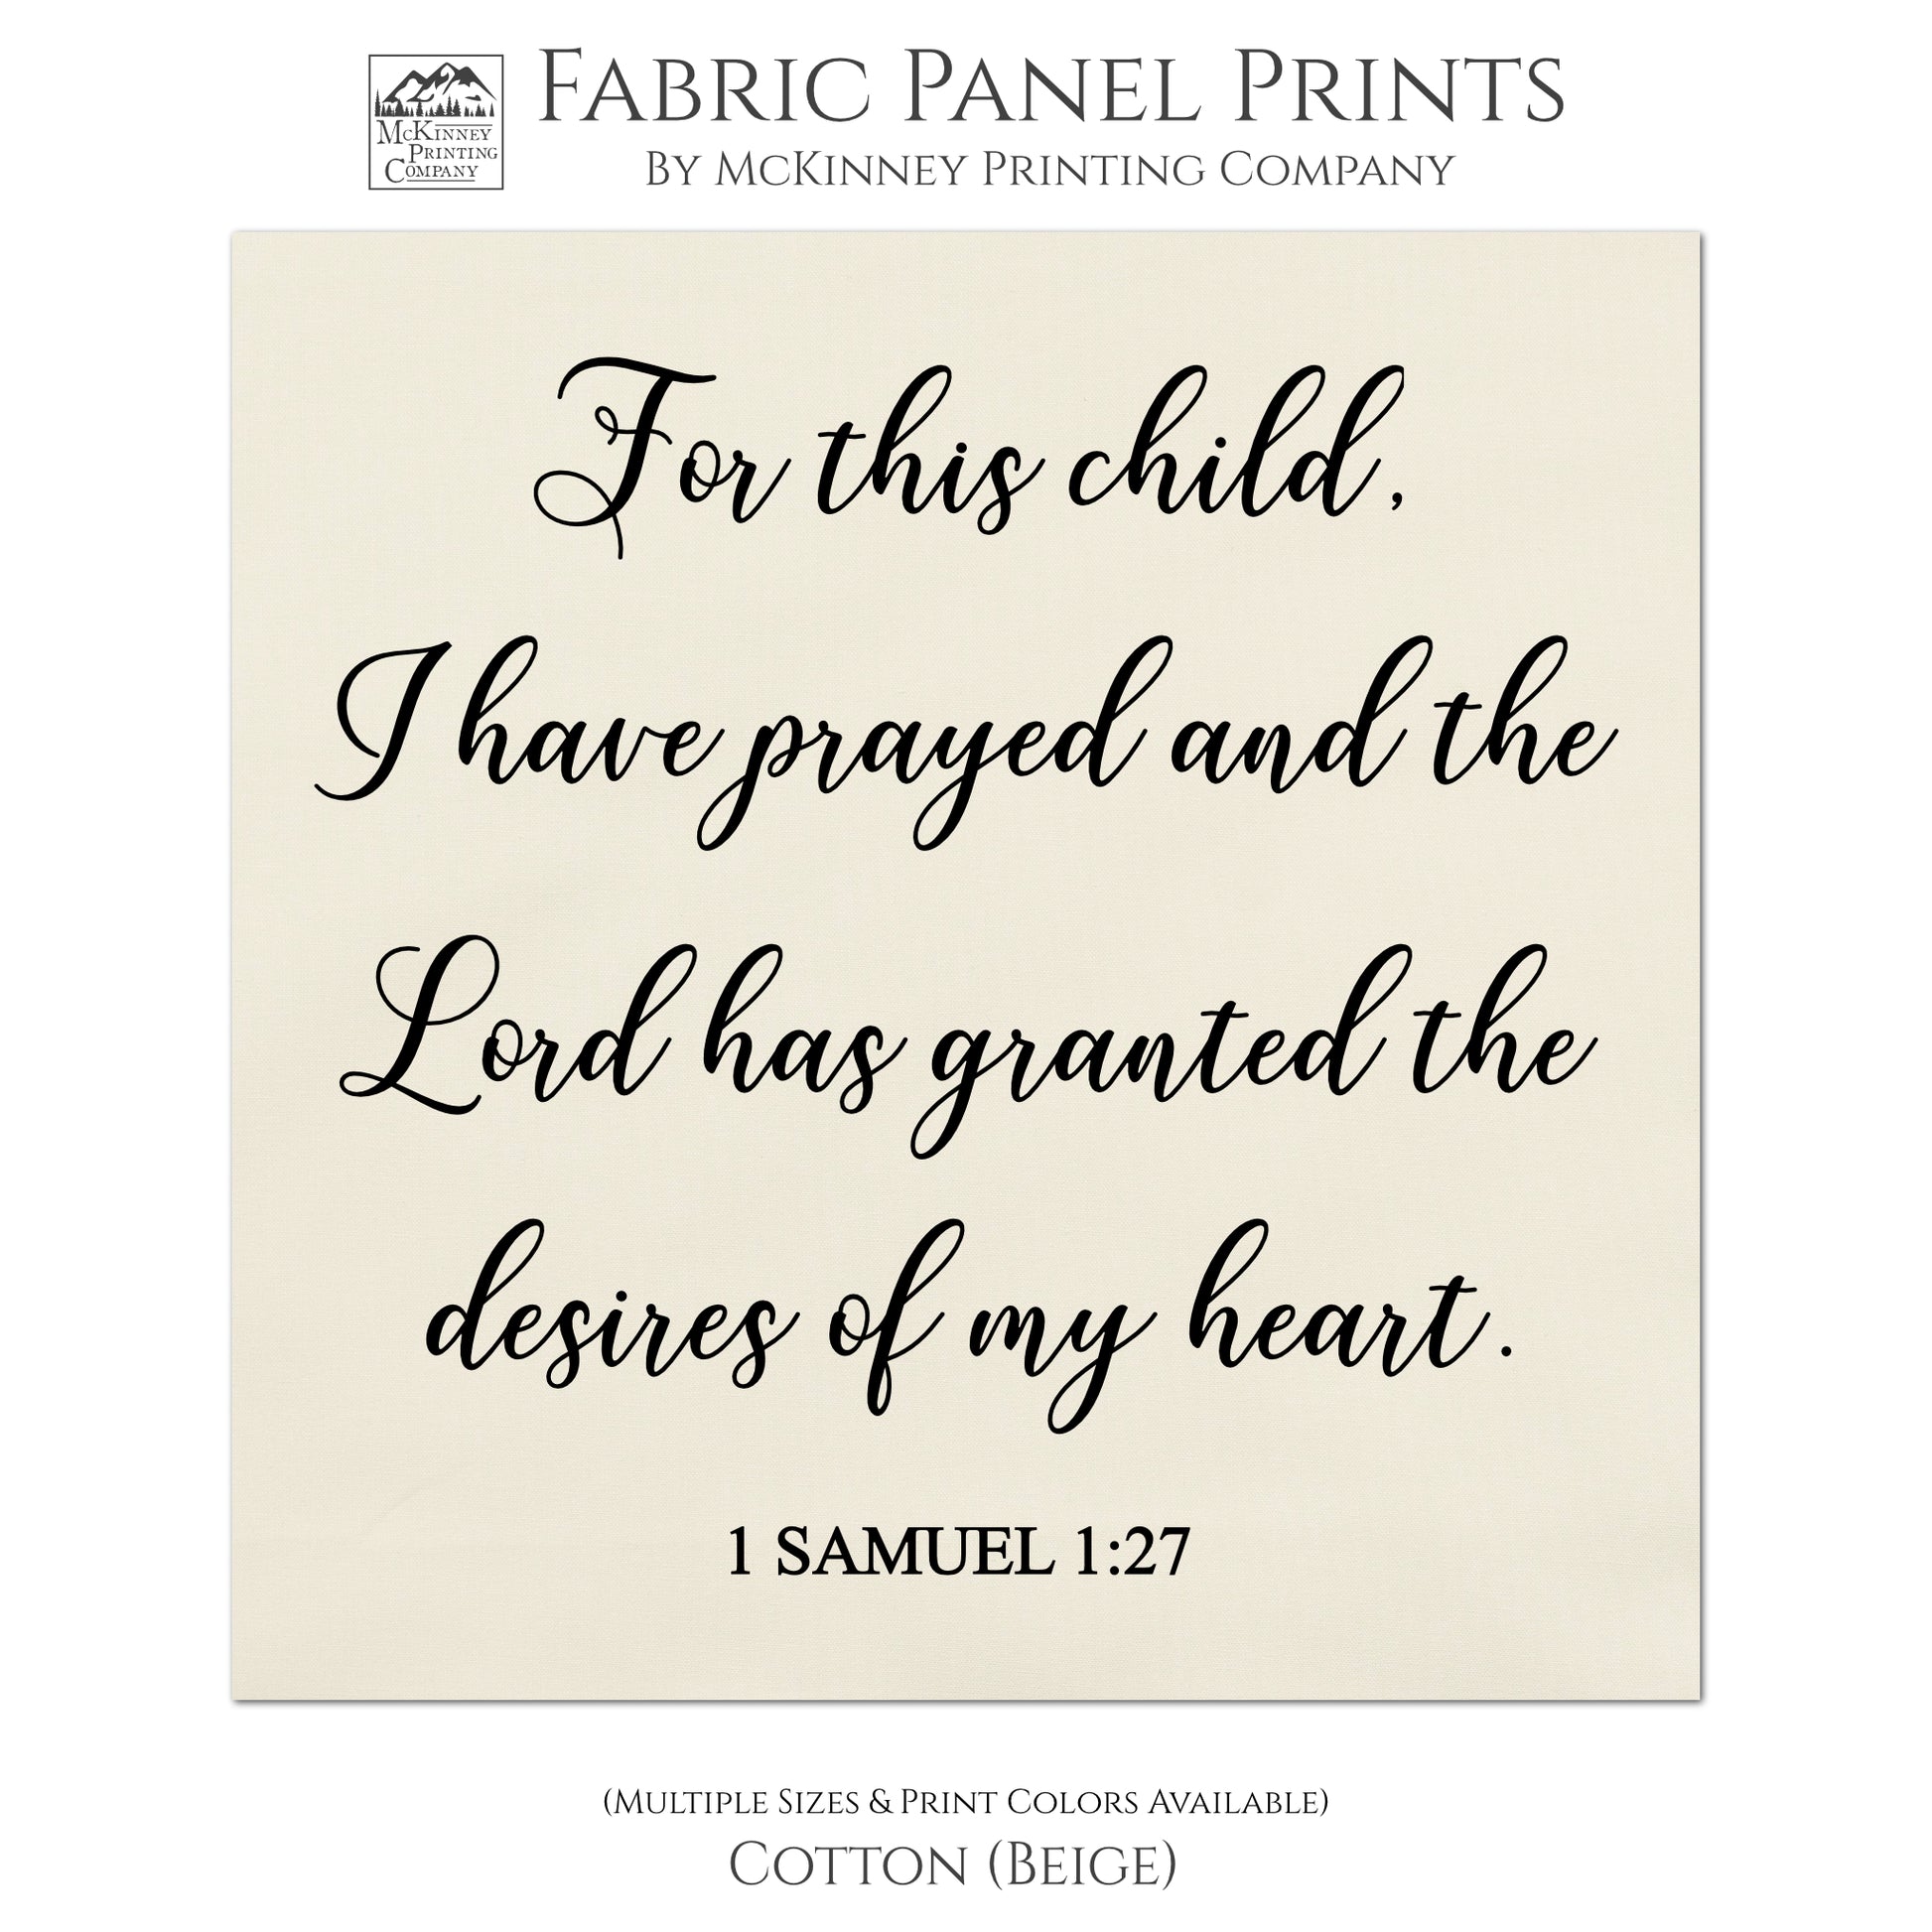 For This Child I Have Prayed, and the Lord has granted the desires of my heart - 1 Samuel 1:27, Bible Verse, Scripture Fabric - Cotton